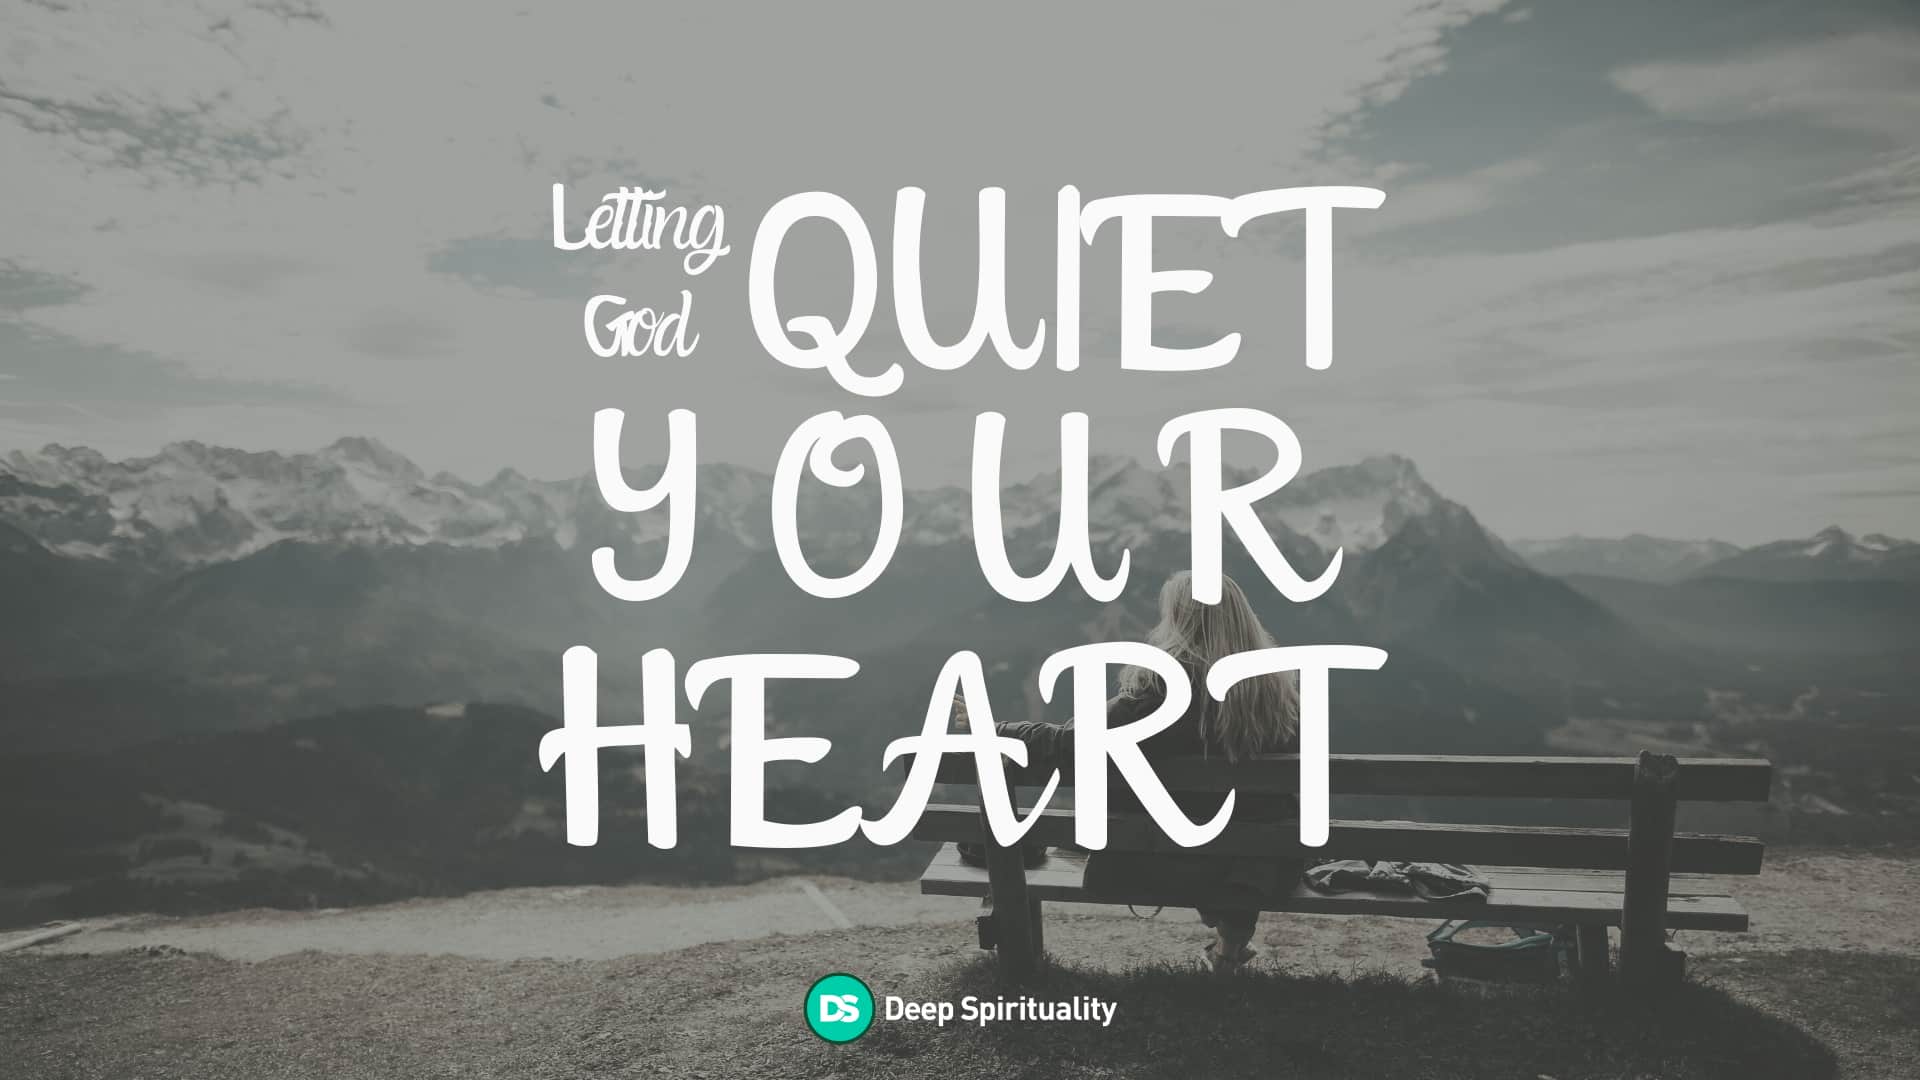 The Ultimate Guide to Letting God Quiet Your Heart 12